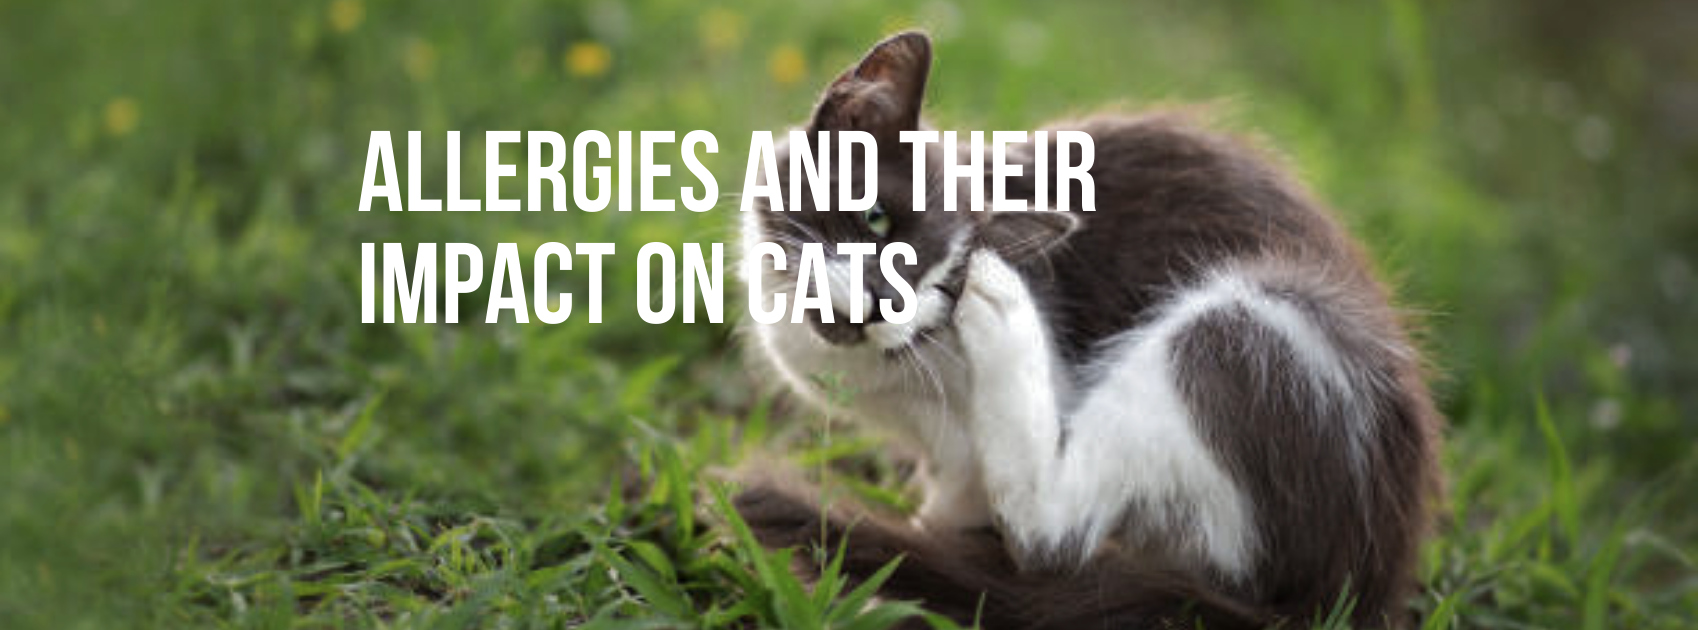 Allergies and Their Impact On Cats